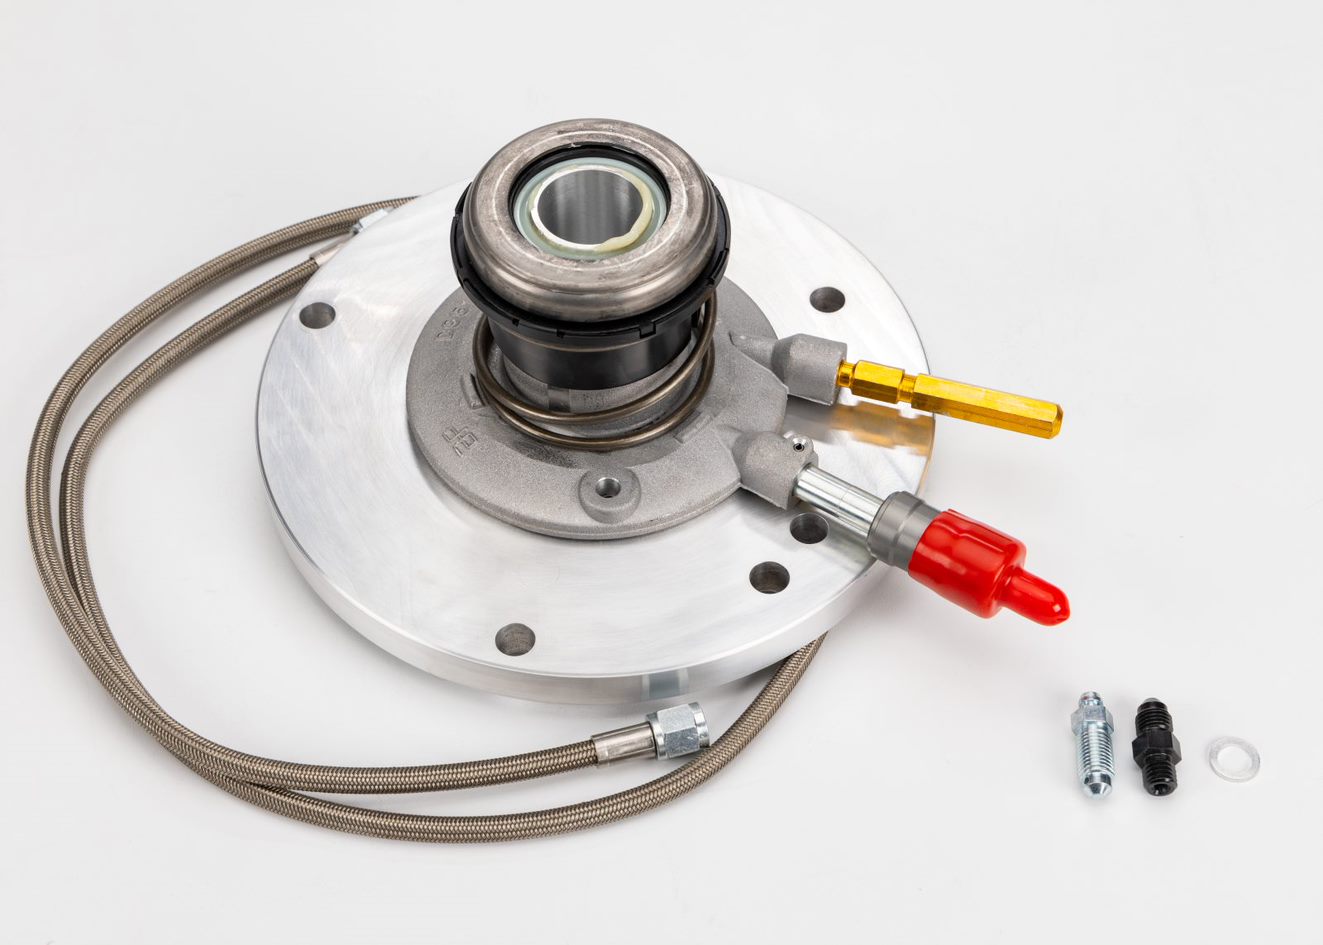 Bellhousing adapter with throwout bearing and remote bleeder for 1982-1991 Porsche 944 LS Swap Kit.